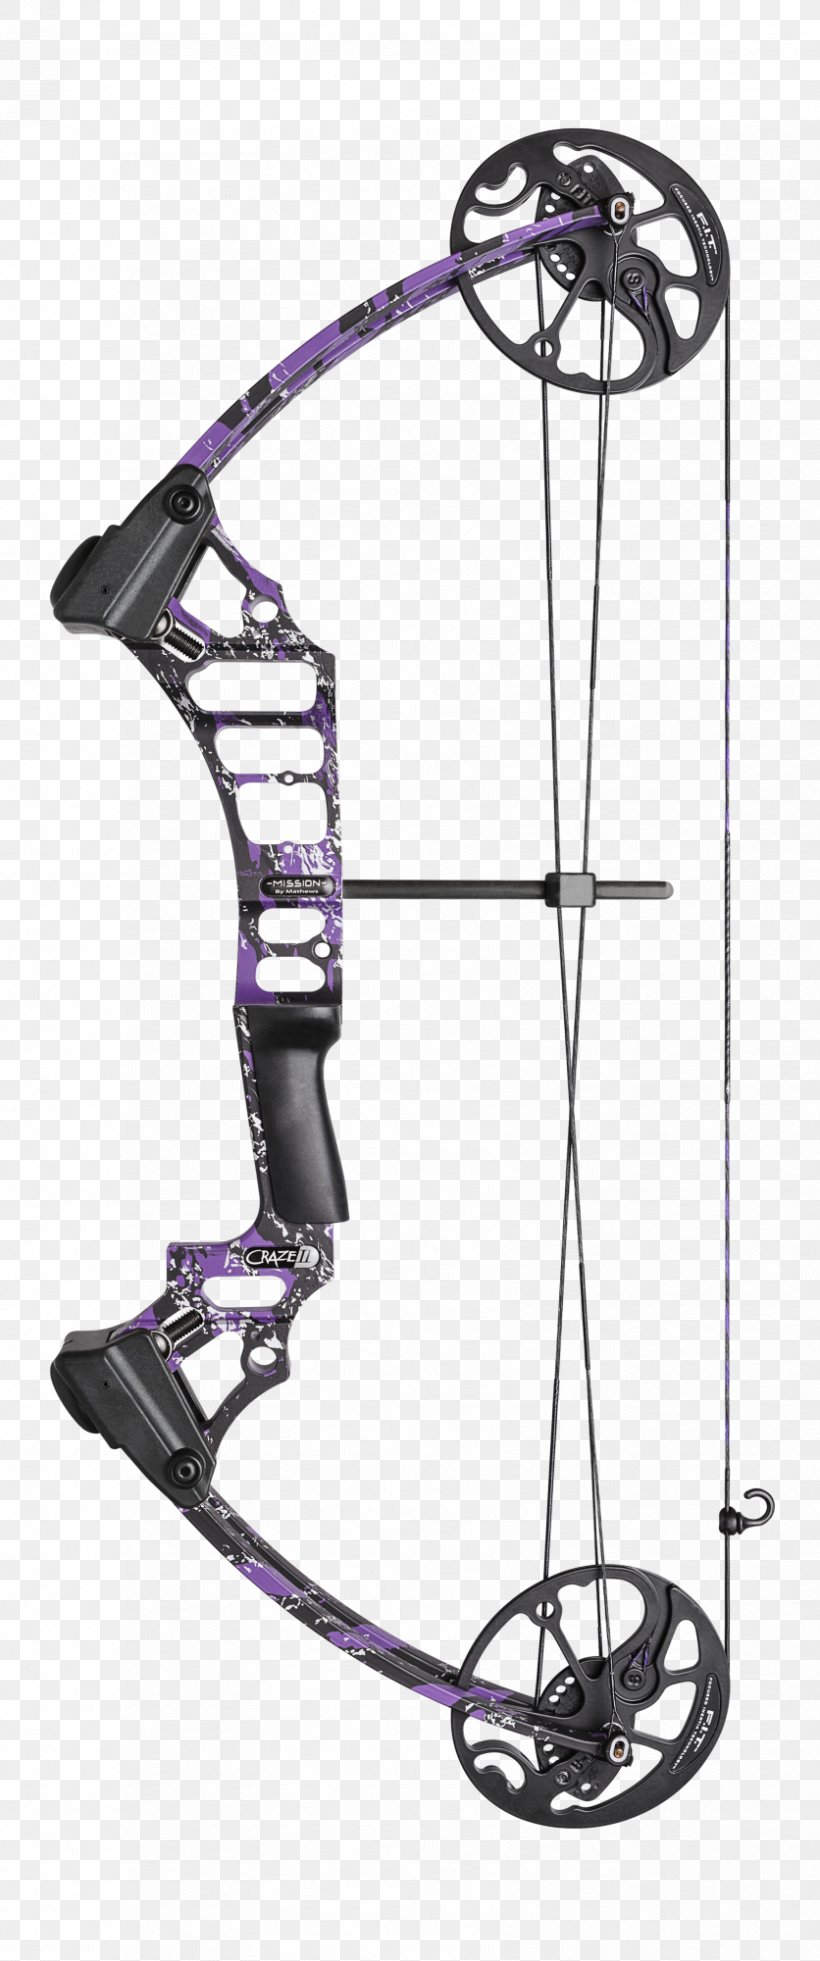 Archery Compound Bows Hunting Bow And Arrow Shooting, PNG, 836x2000px, Archery, Advanced Archery, Ballistics, Borkholder Archery, Bow And Arrow Download Free